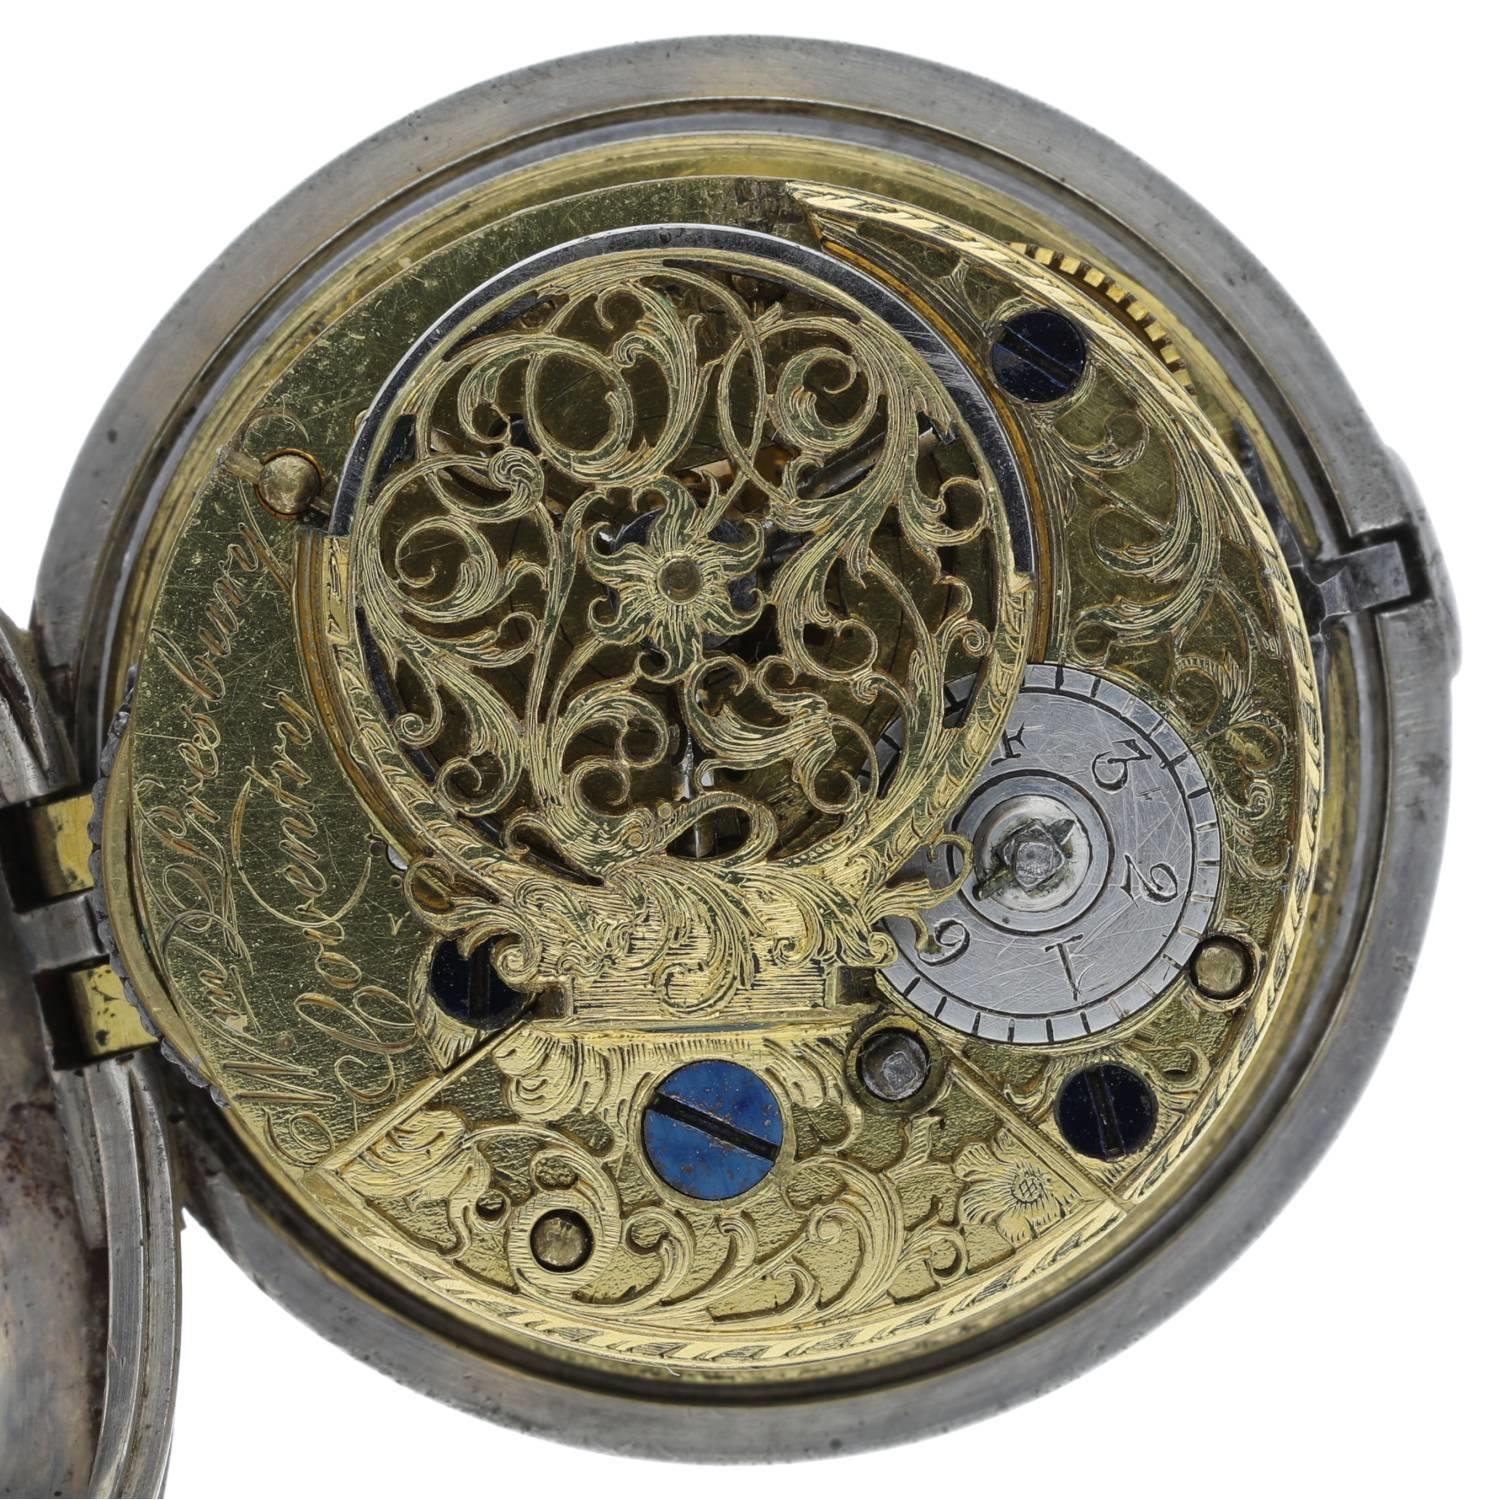 William Presbury, Coventry - English 18th century silver pair cased verge pocket watch, London 1763, - Image 4 of 10